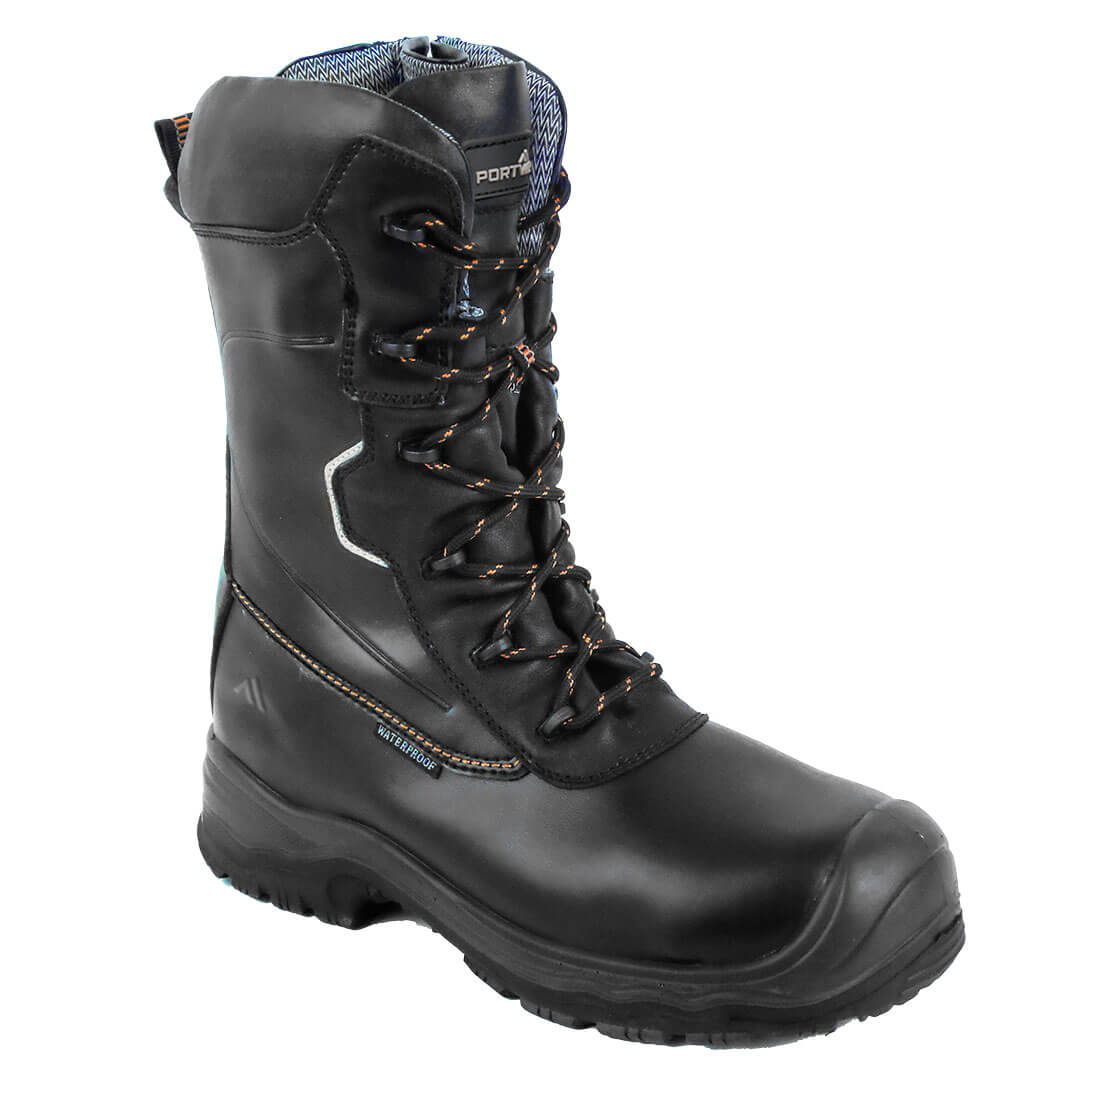 Portwest Compositelite Traction 10 inch (25cm) Safety Boot S3 HRO CI WR Boots FD01